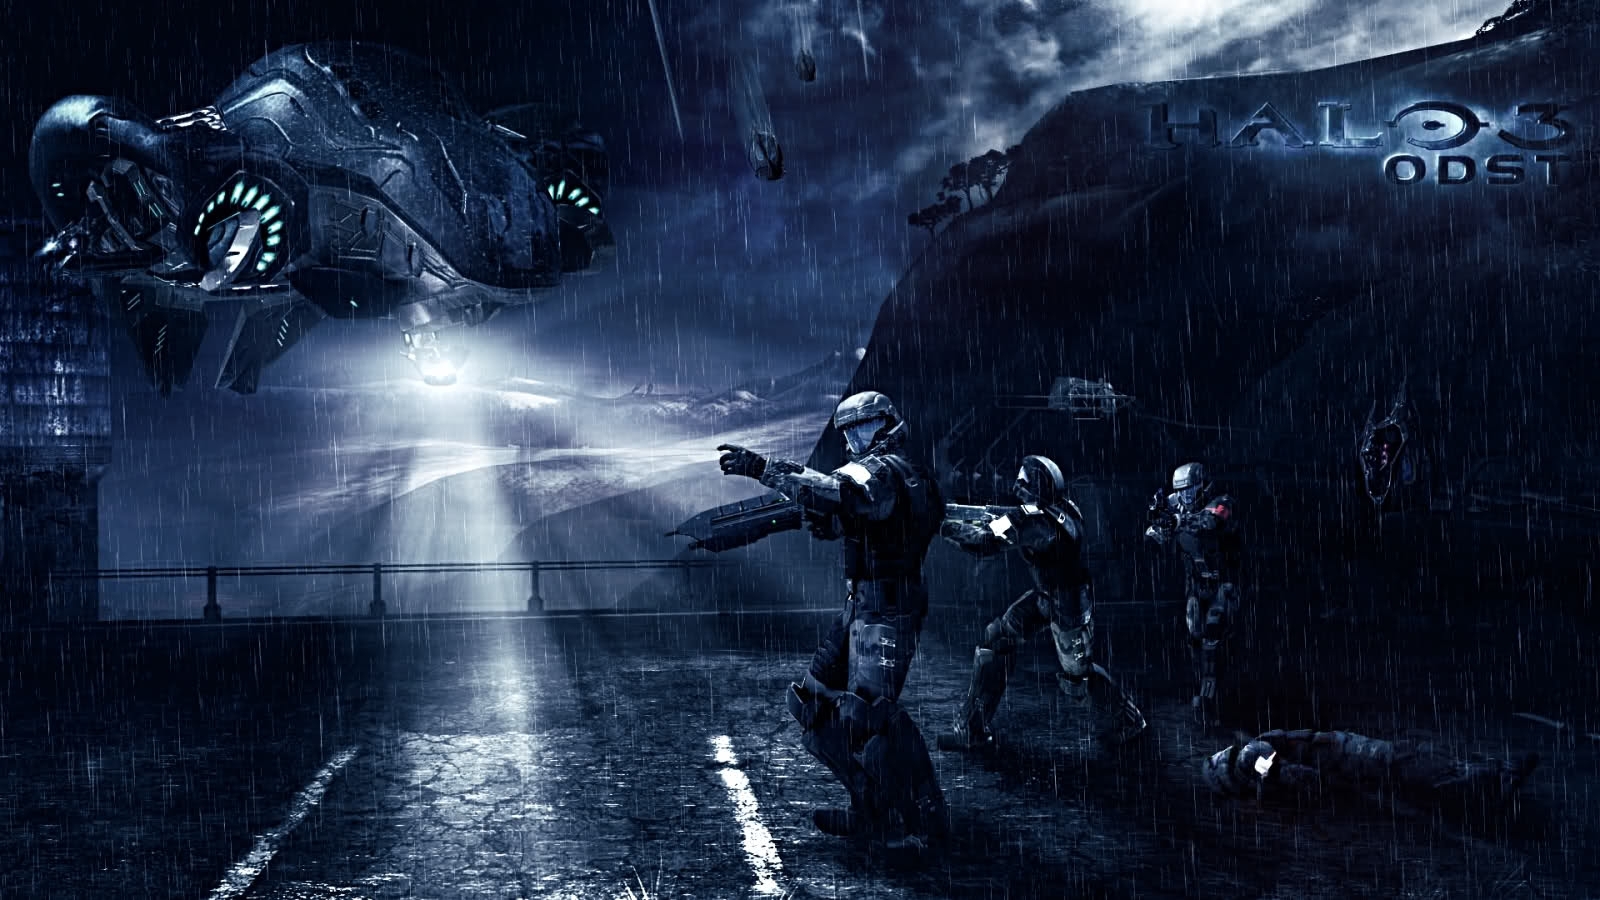 halo 3 odst pc download full version free